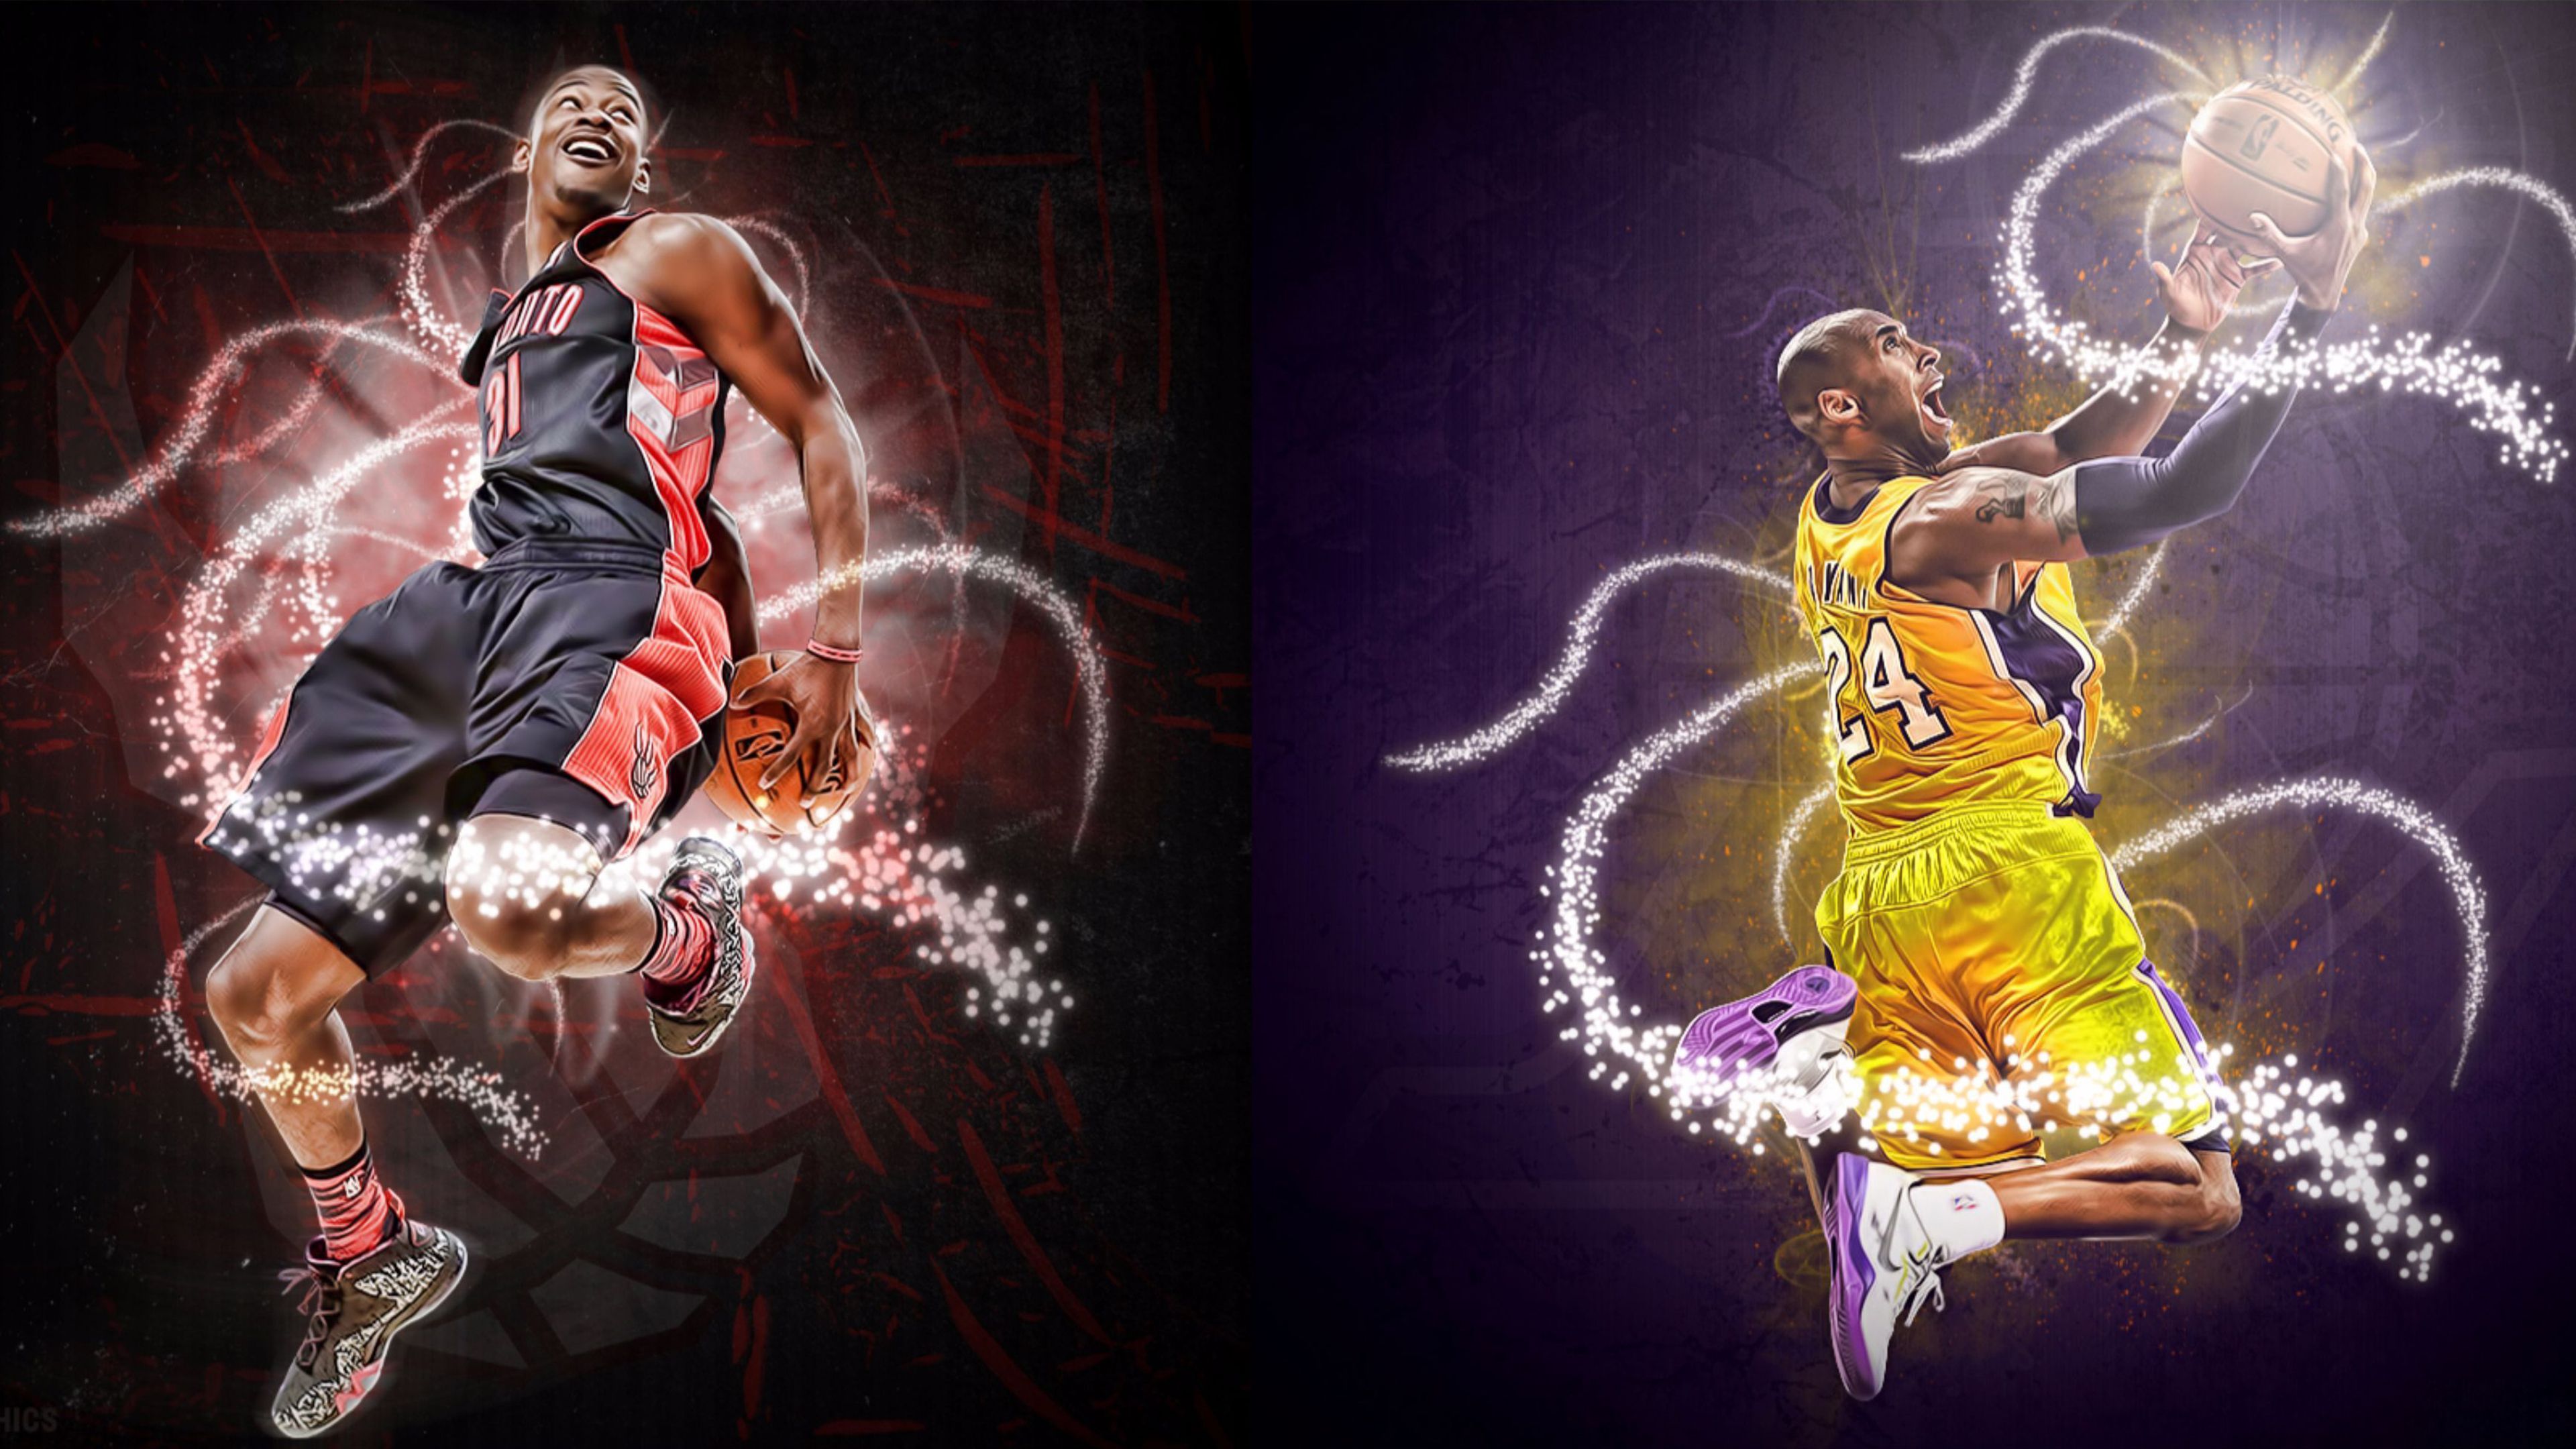 Two basketball players in the air, one in red and white, the other in yellow and purple - Kobe Bryant